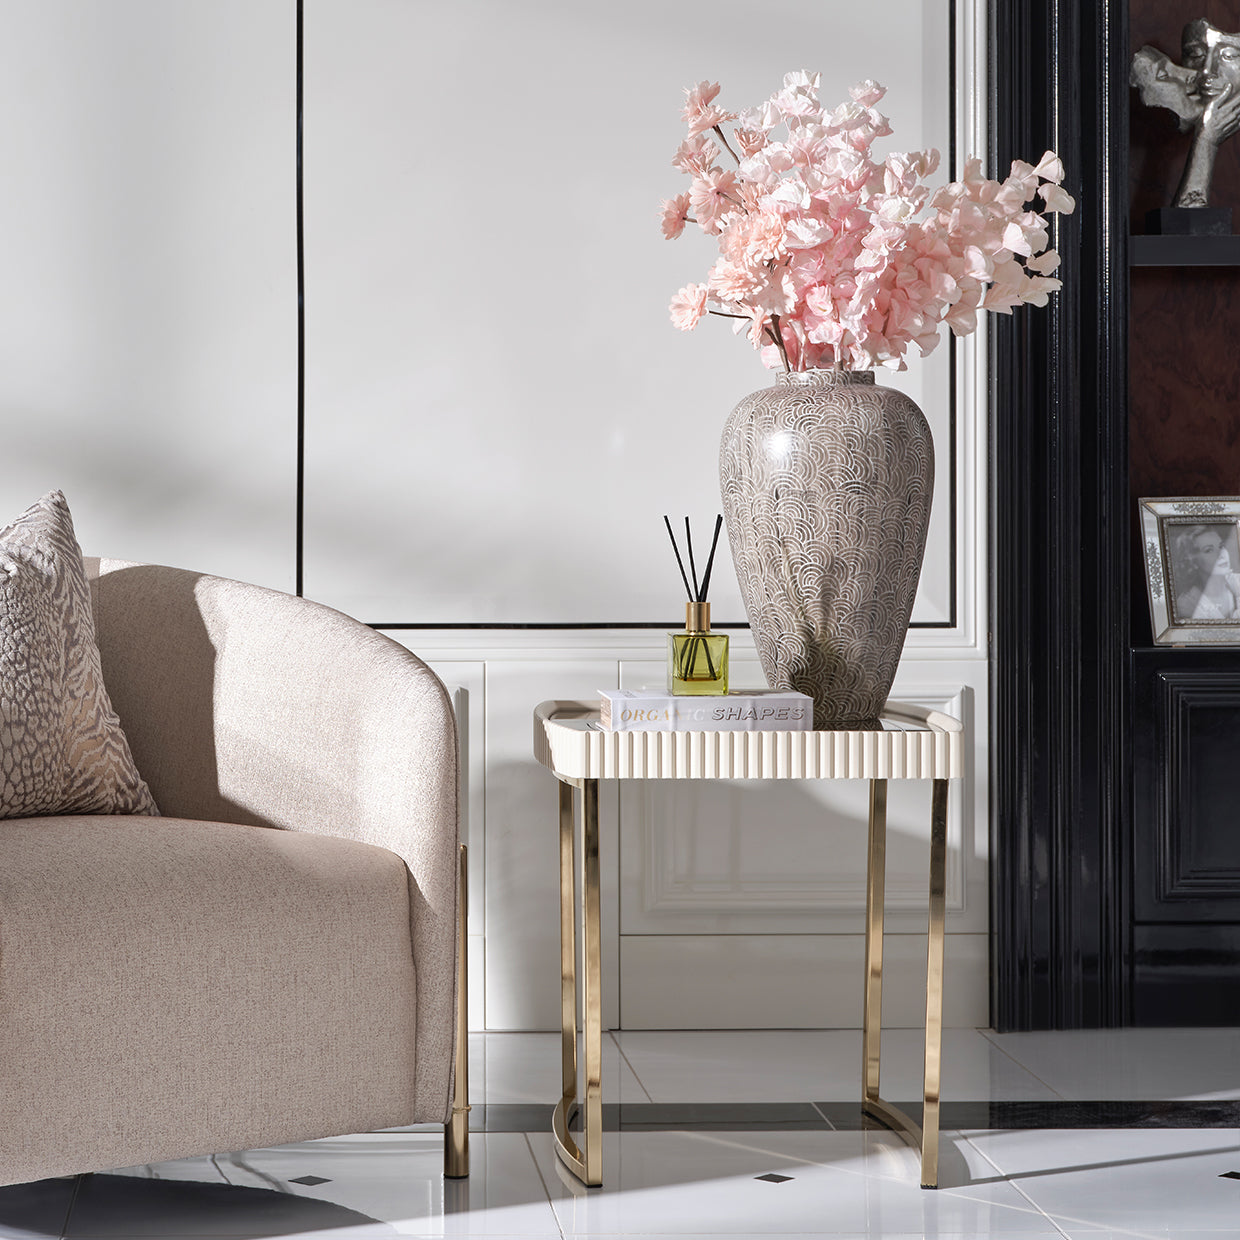 Sophisticated design, Lisbon Side Table, Living space, Timeless elegance, Functionality, Home décor, Silky matte apron, Reeded trim, Texture, Gold legs, Refinement, Visual, appeal, dream art , Michael amini, Side Table, Silken Matte Cream